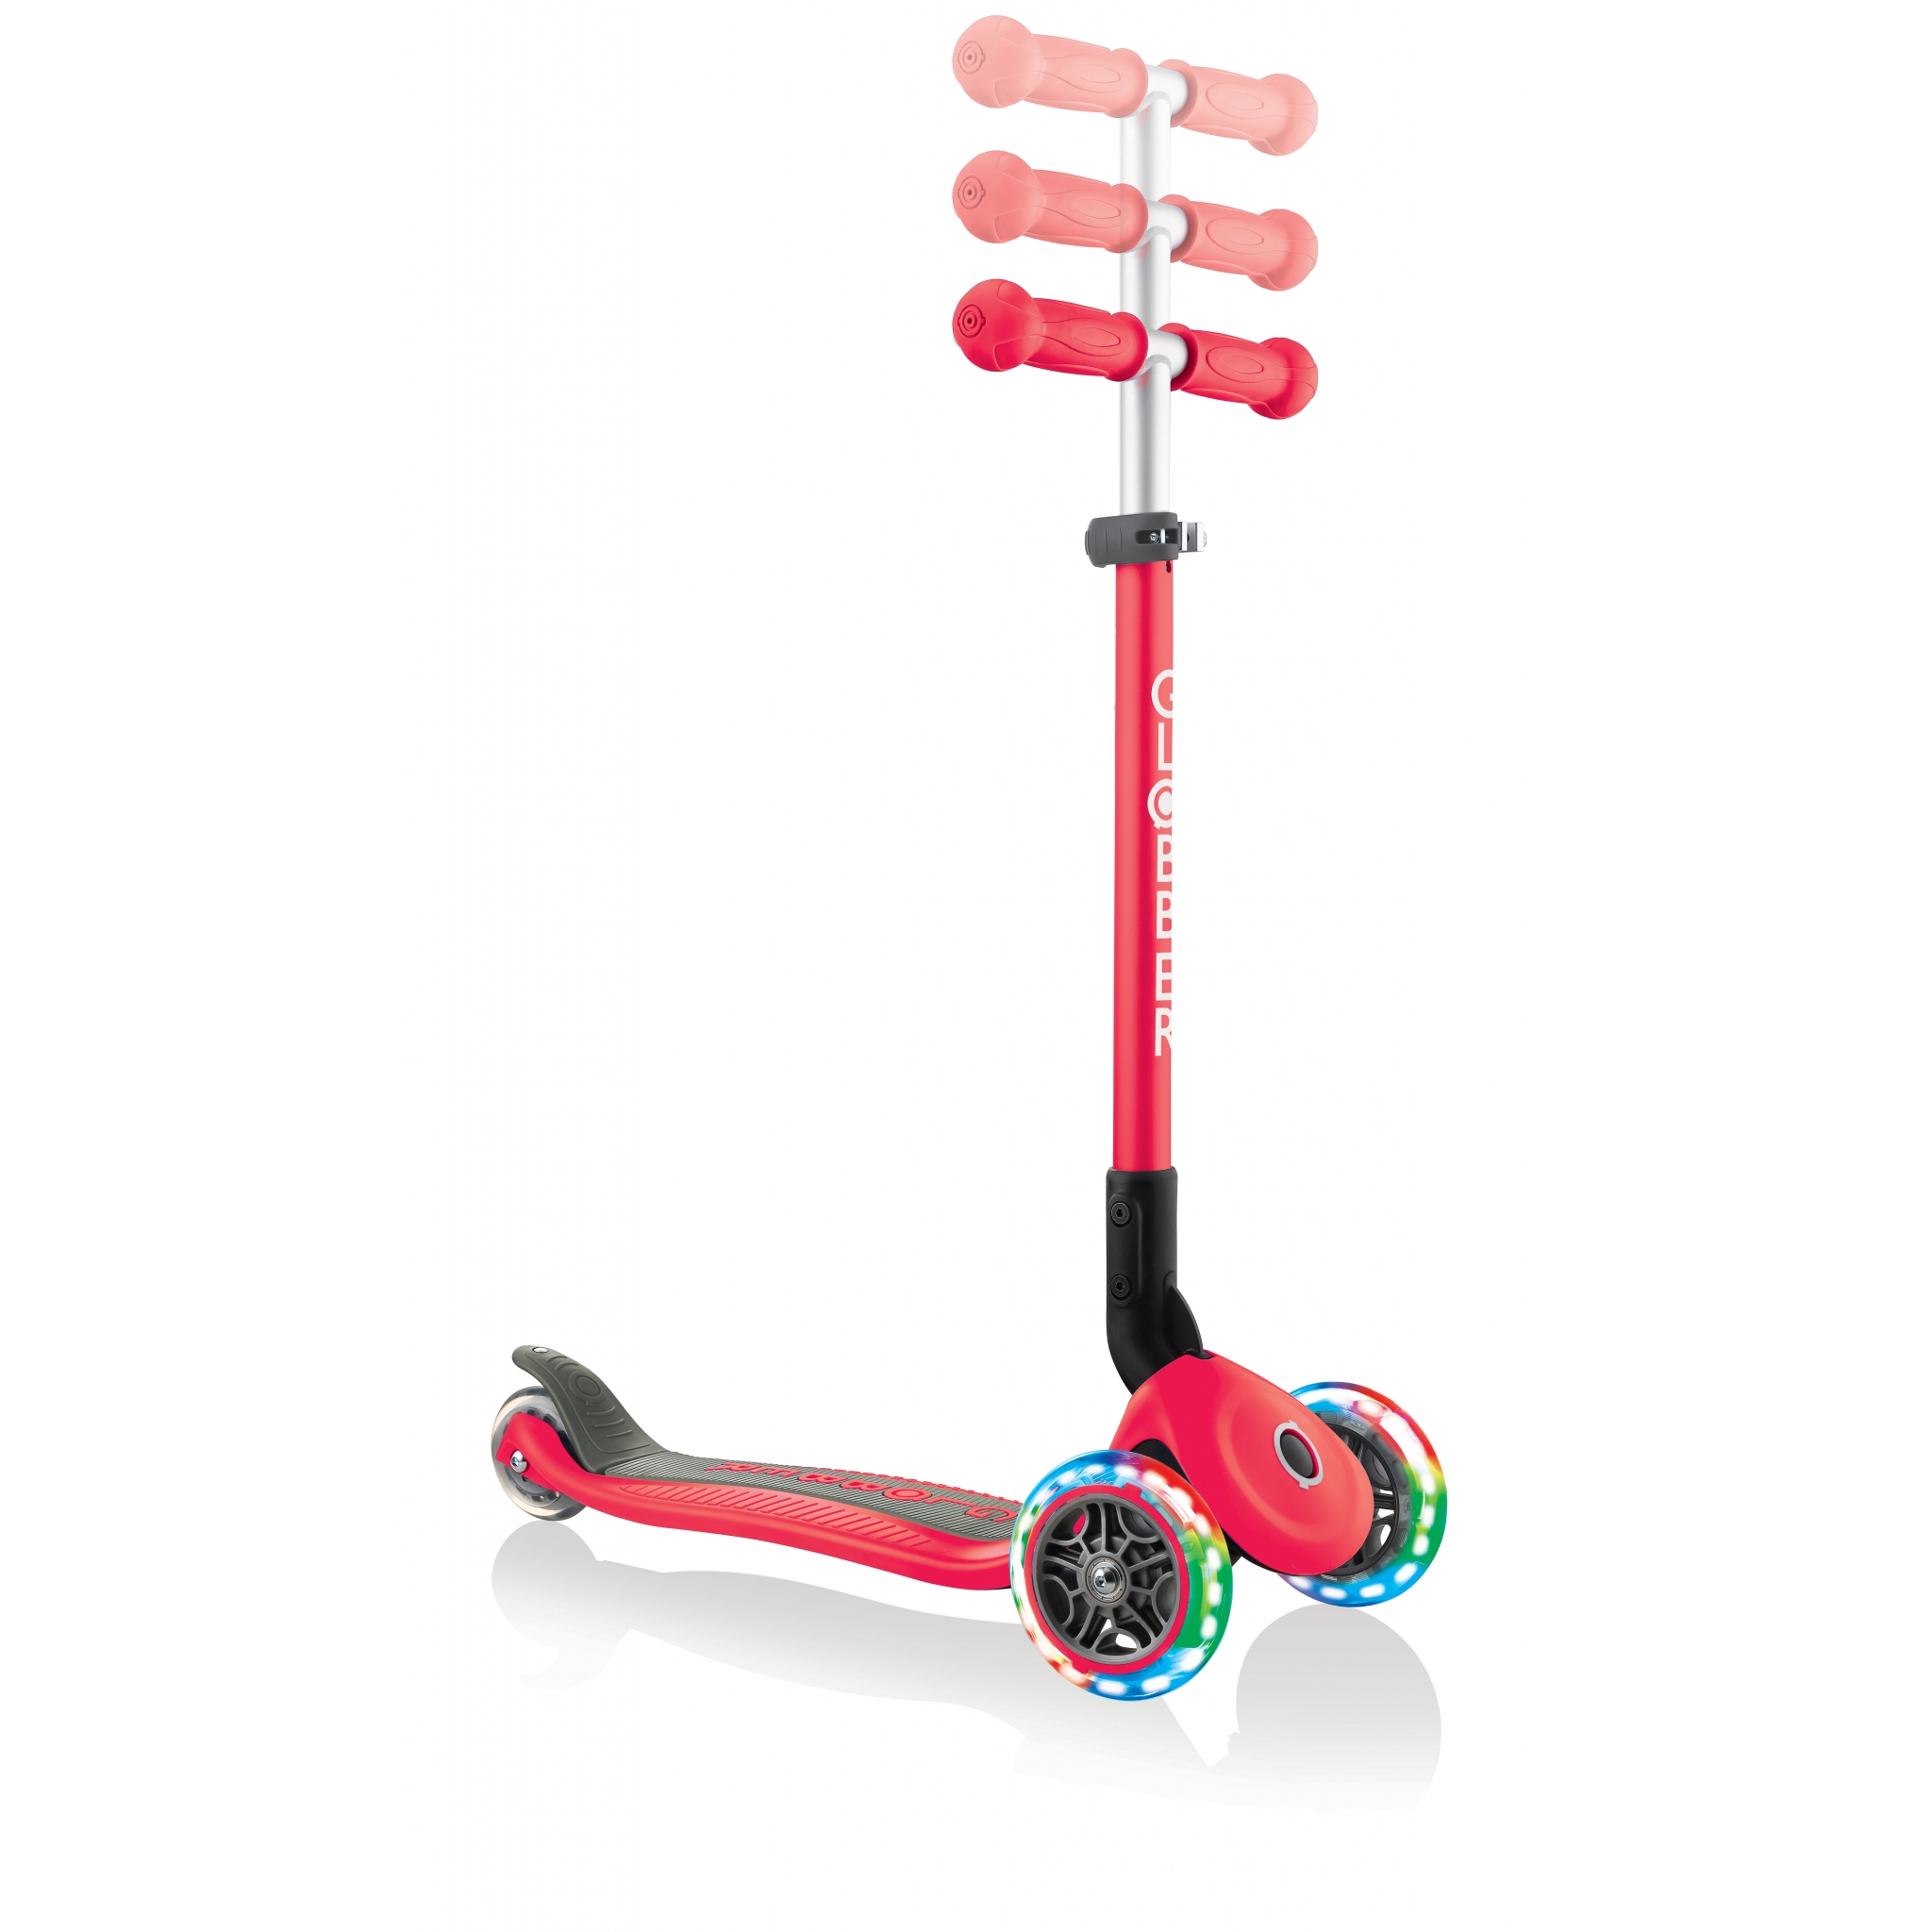 PRIMO-FOLDABLE-LIGHTS-adjustable-scooter-for-kids-new-red 5